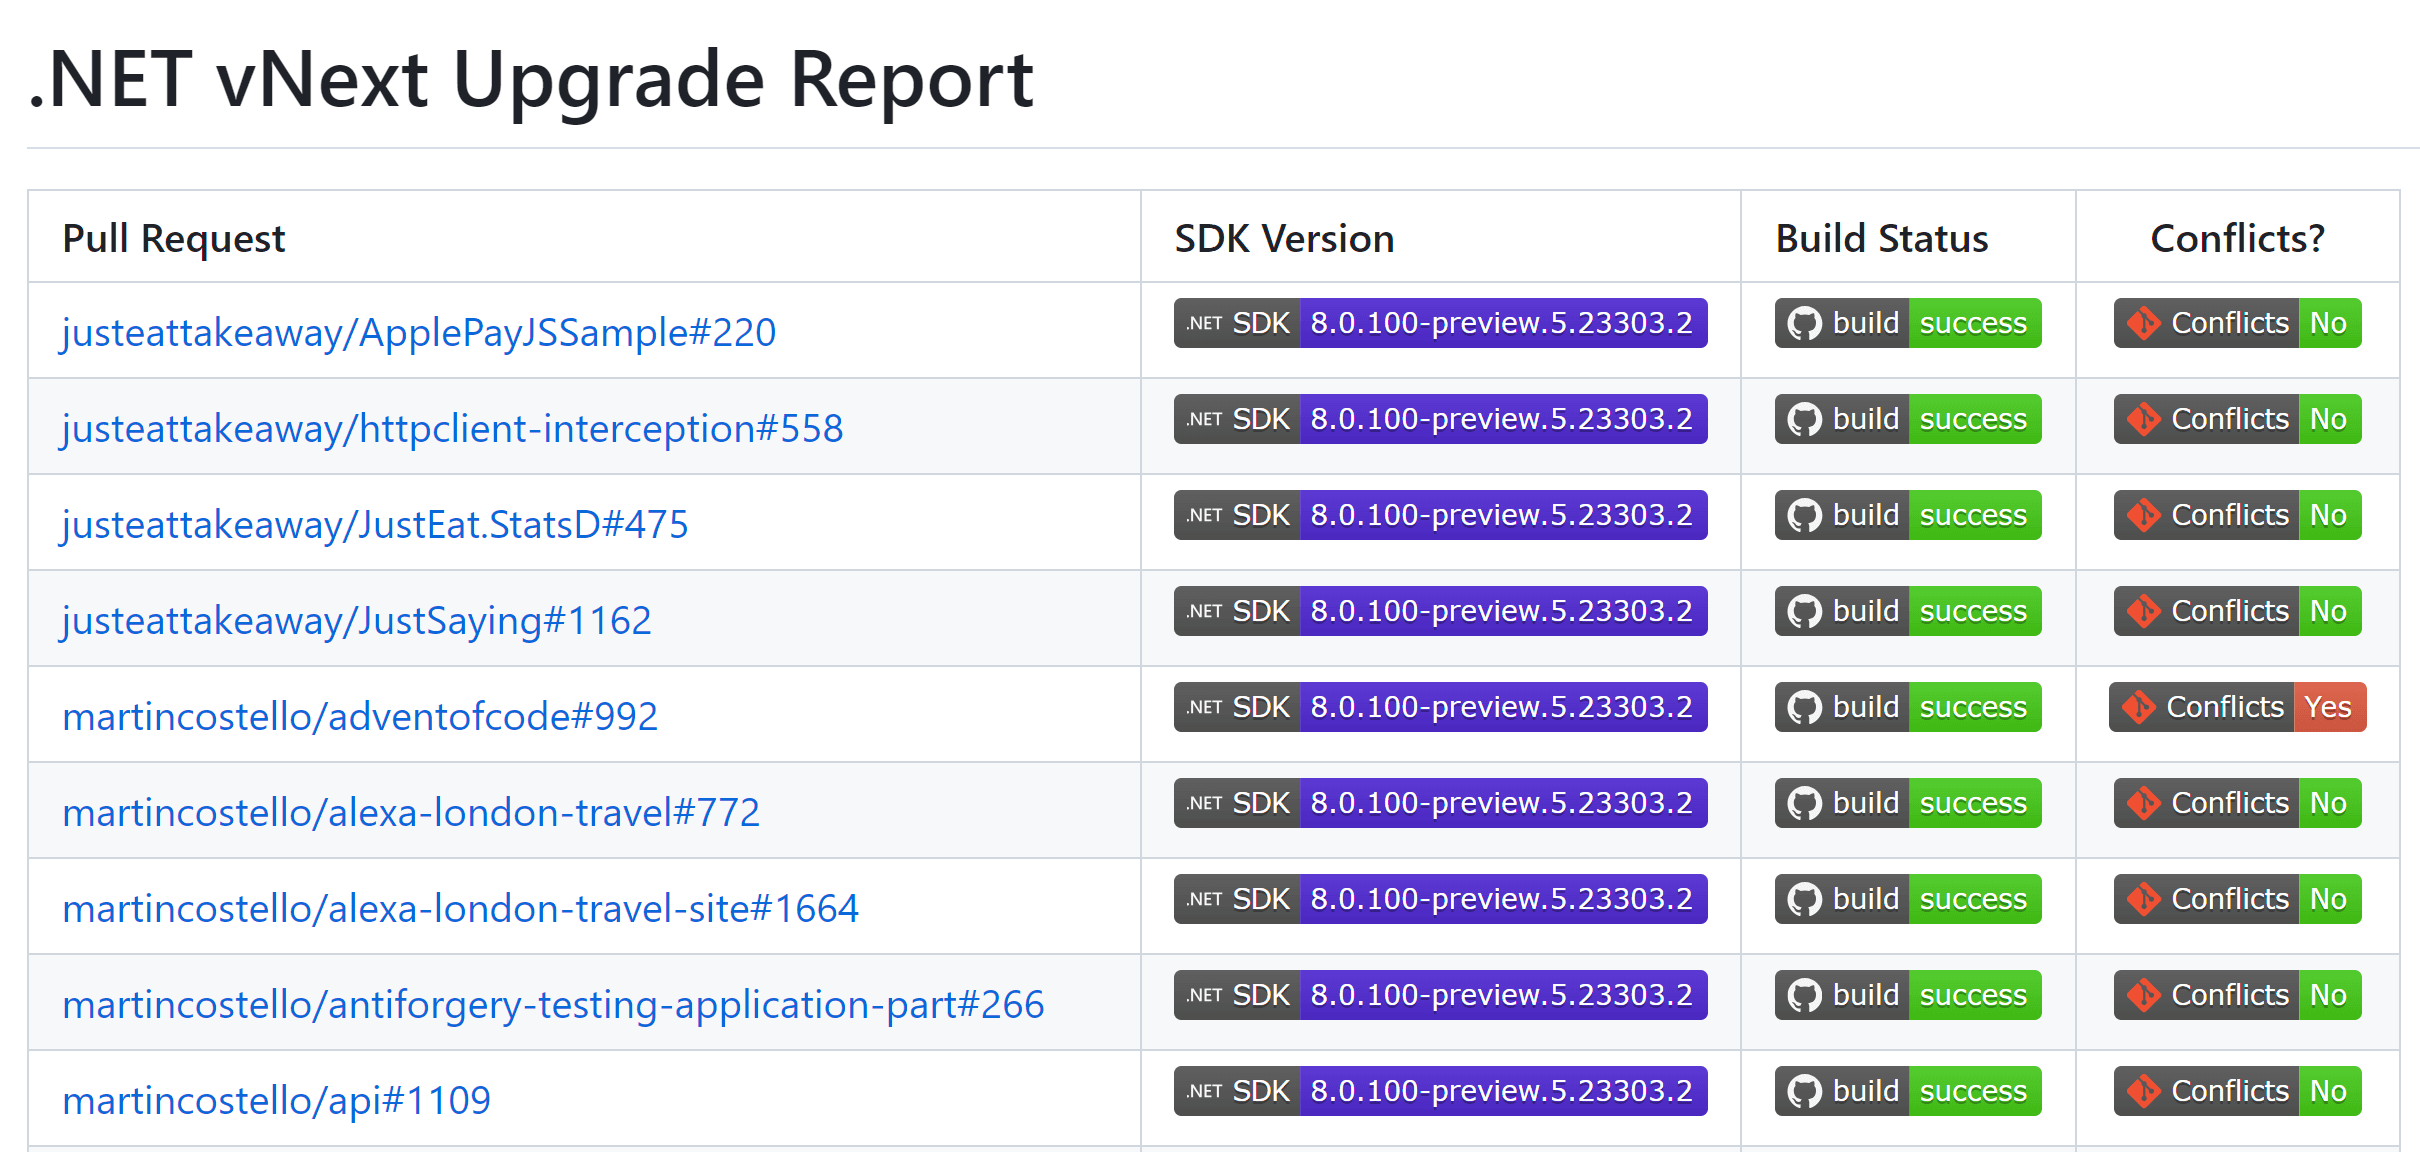 An example upgrade report showing the status of 9 repositories' upgrades